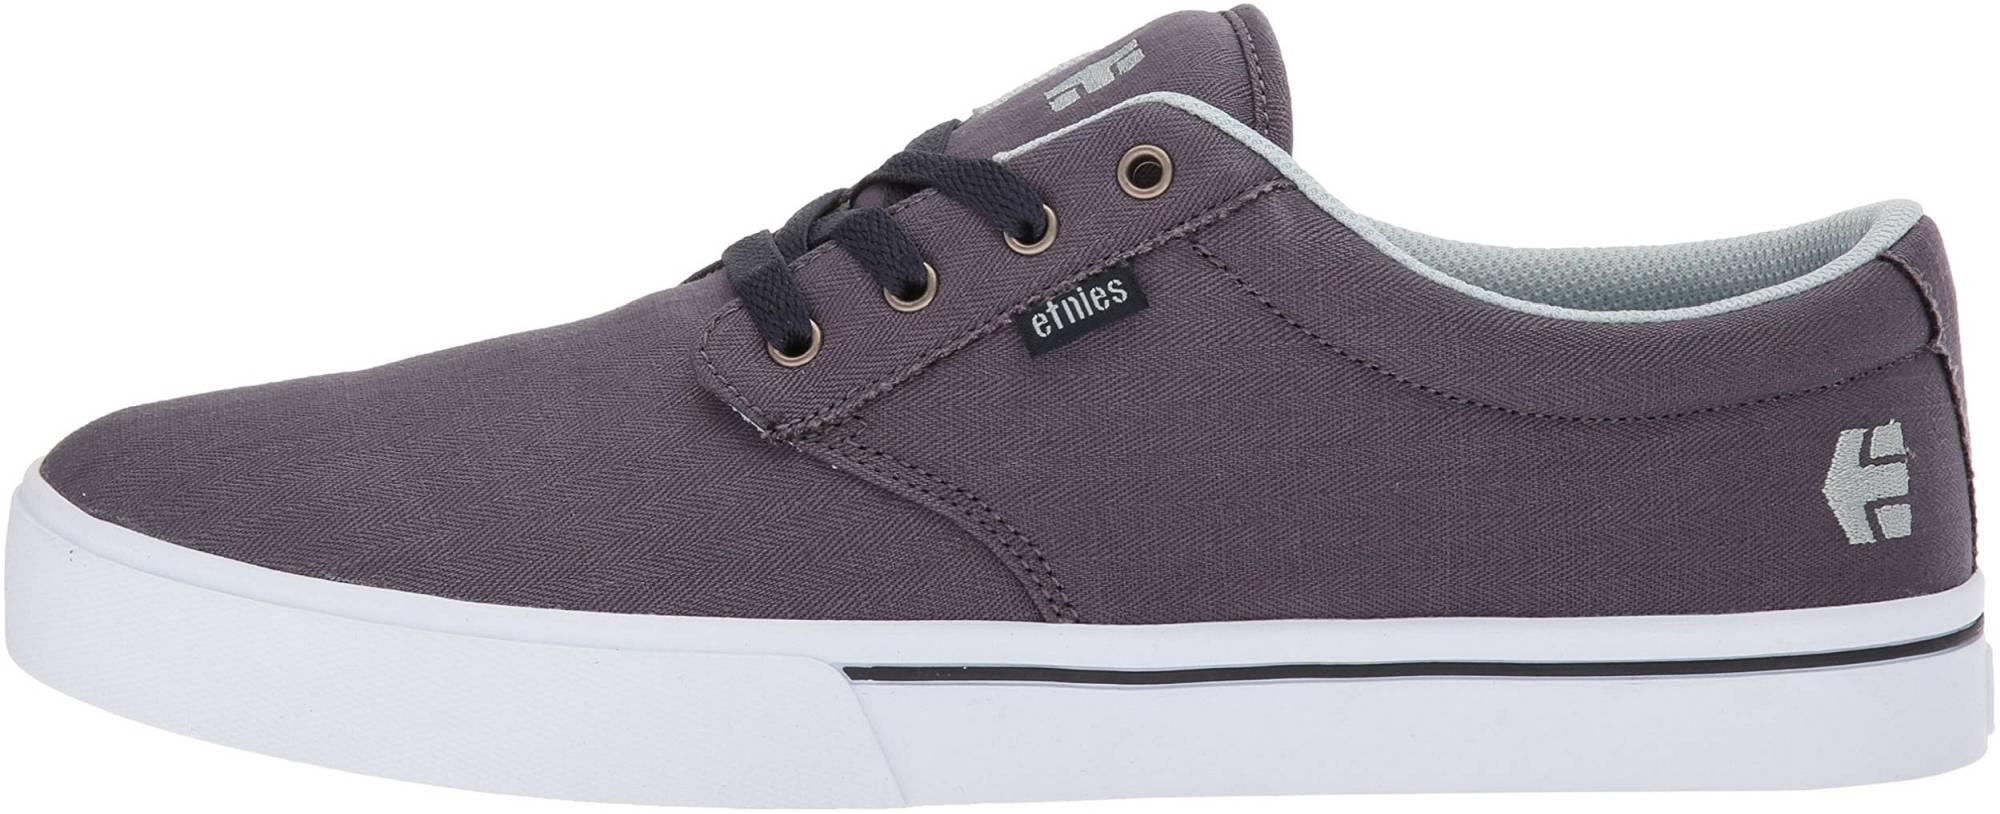 Etnies Jameson 2 Eco – Shoes Reviews & Reasons To Buy